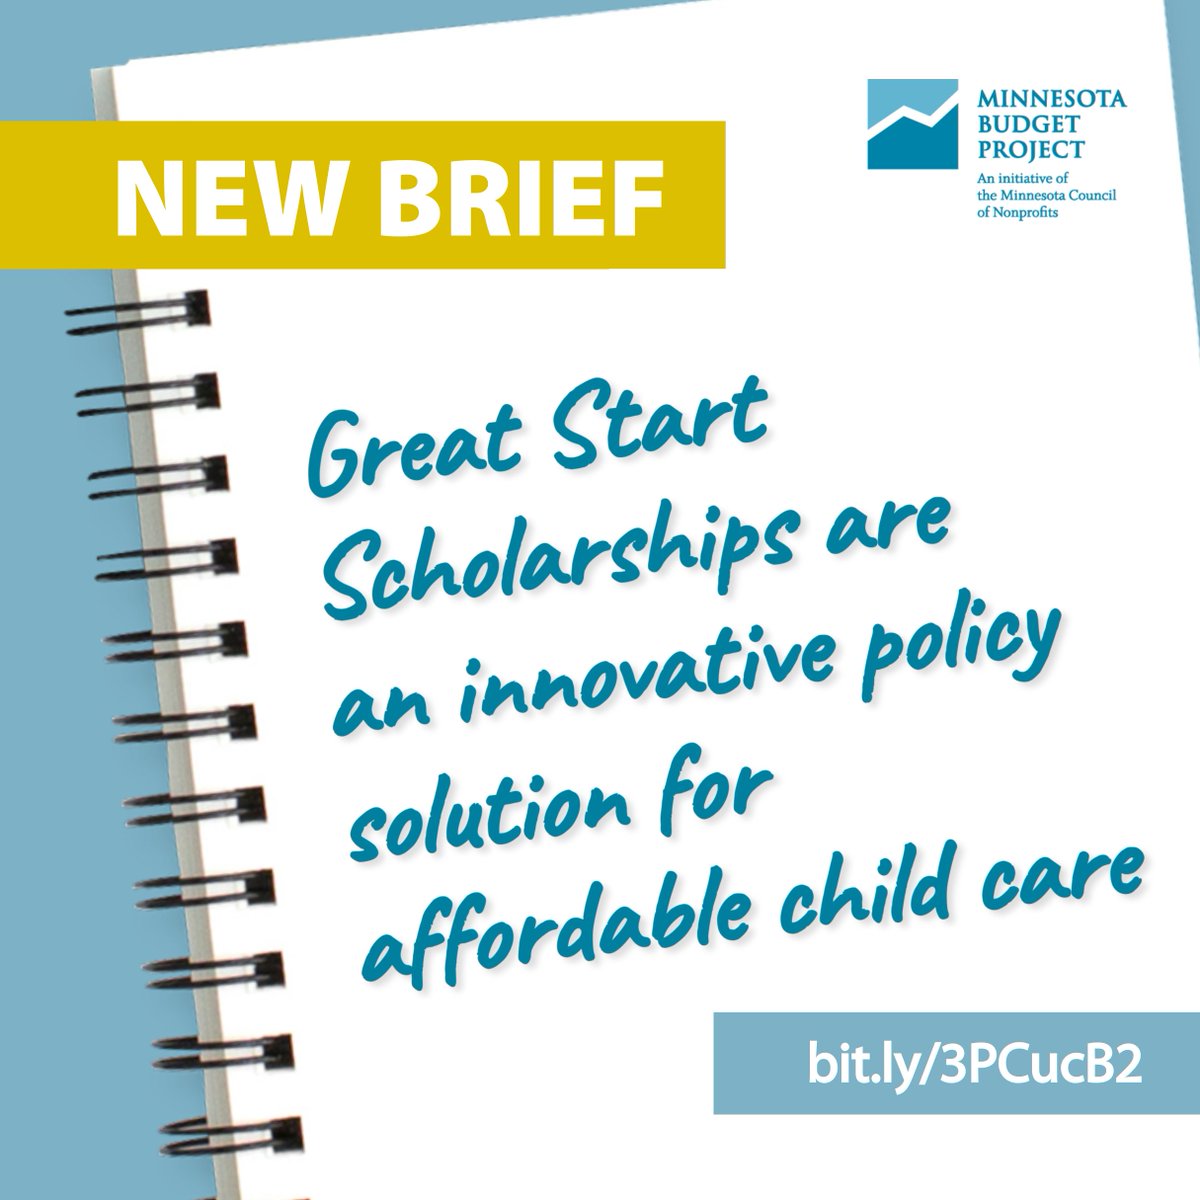 In our latest issue brief, we look at the Great Start Affordability Scholarships, a new policy solution designed to lower monthly child care costs for families across #Minnesota. Read the brief: bit.ly/3PCucB2  

#GreatStartMN #mnleg #affordablechildcare